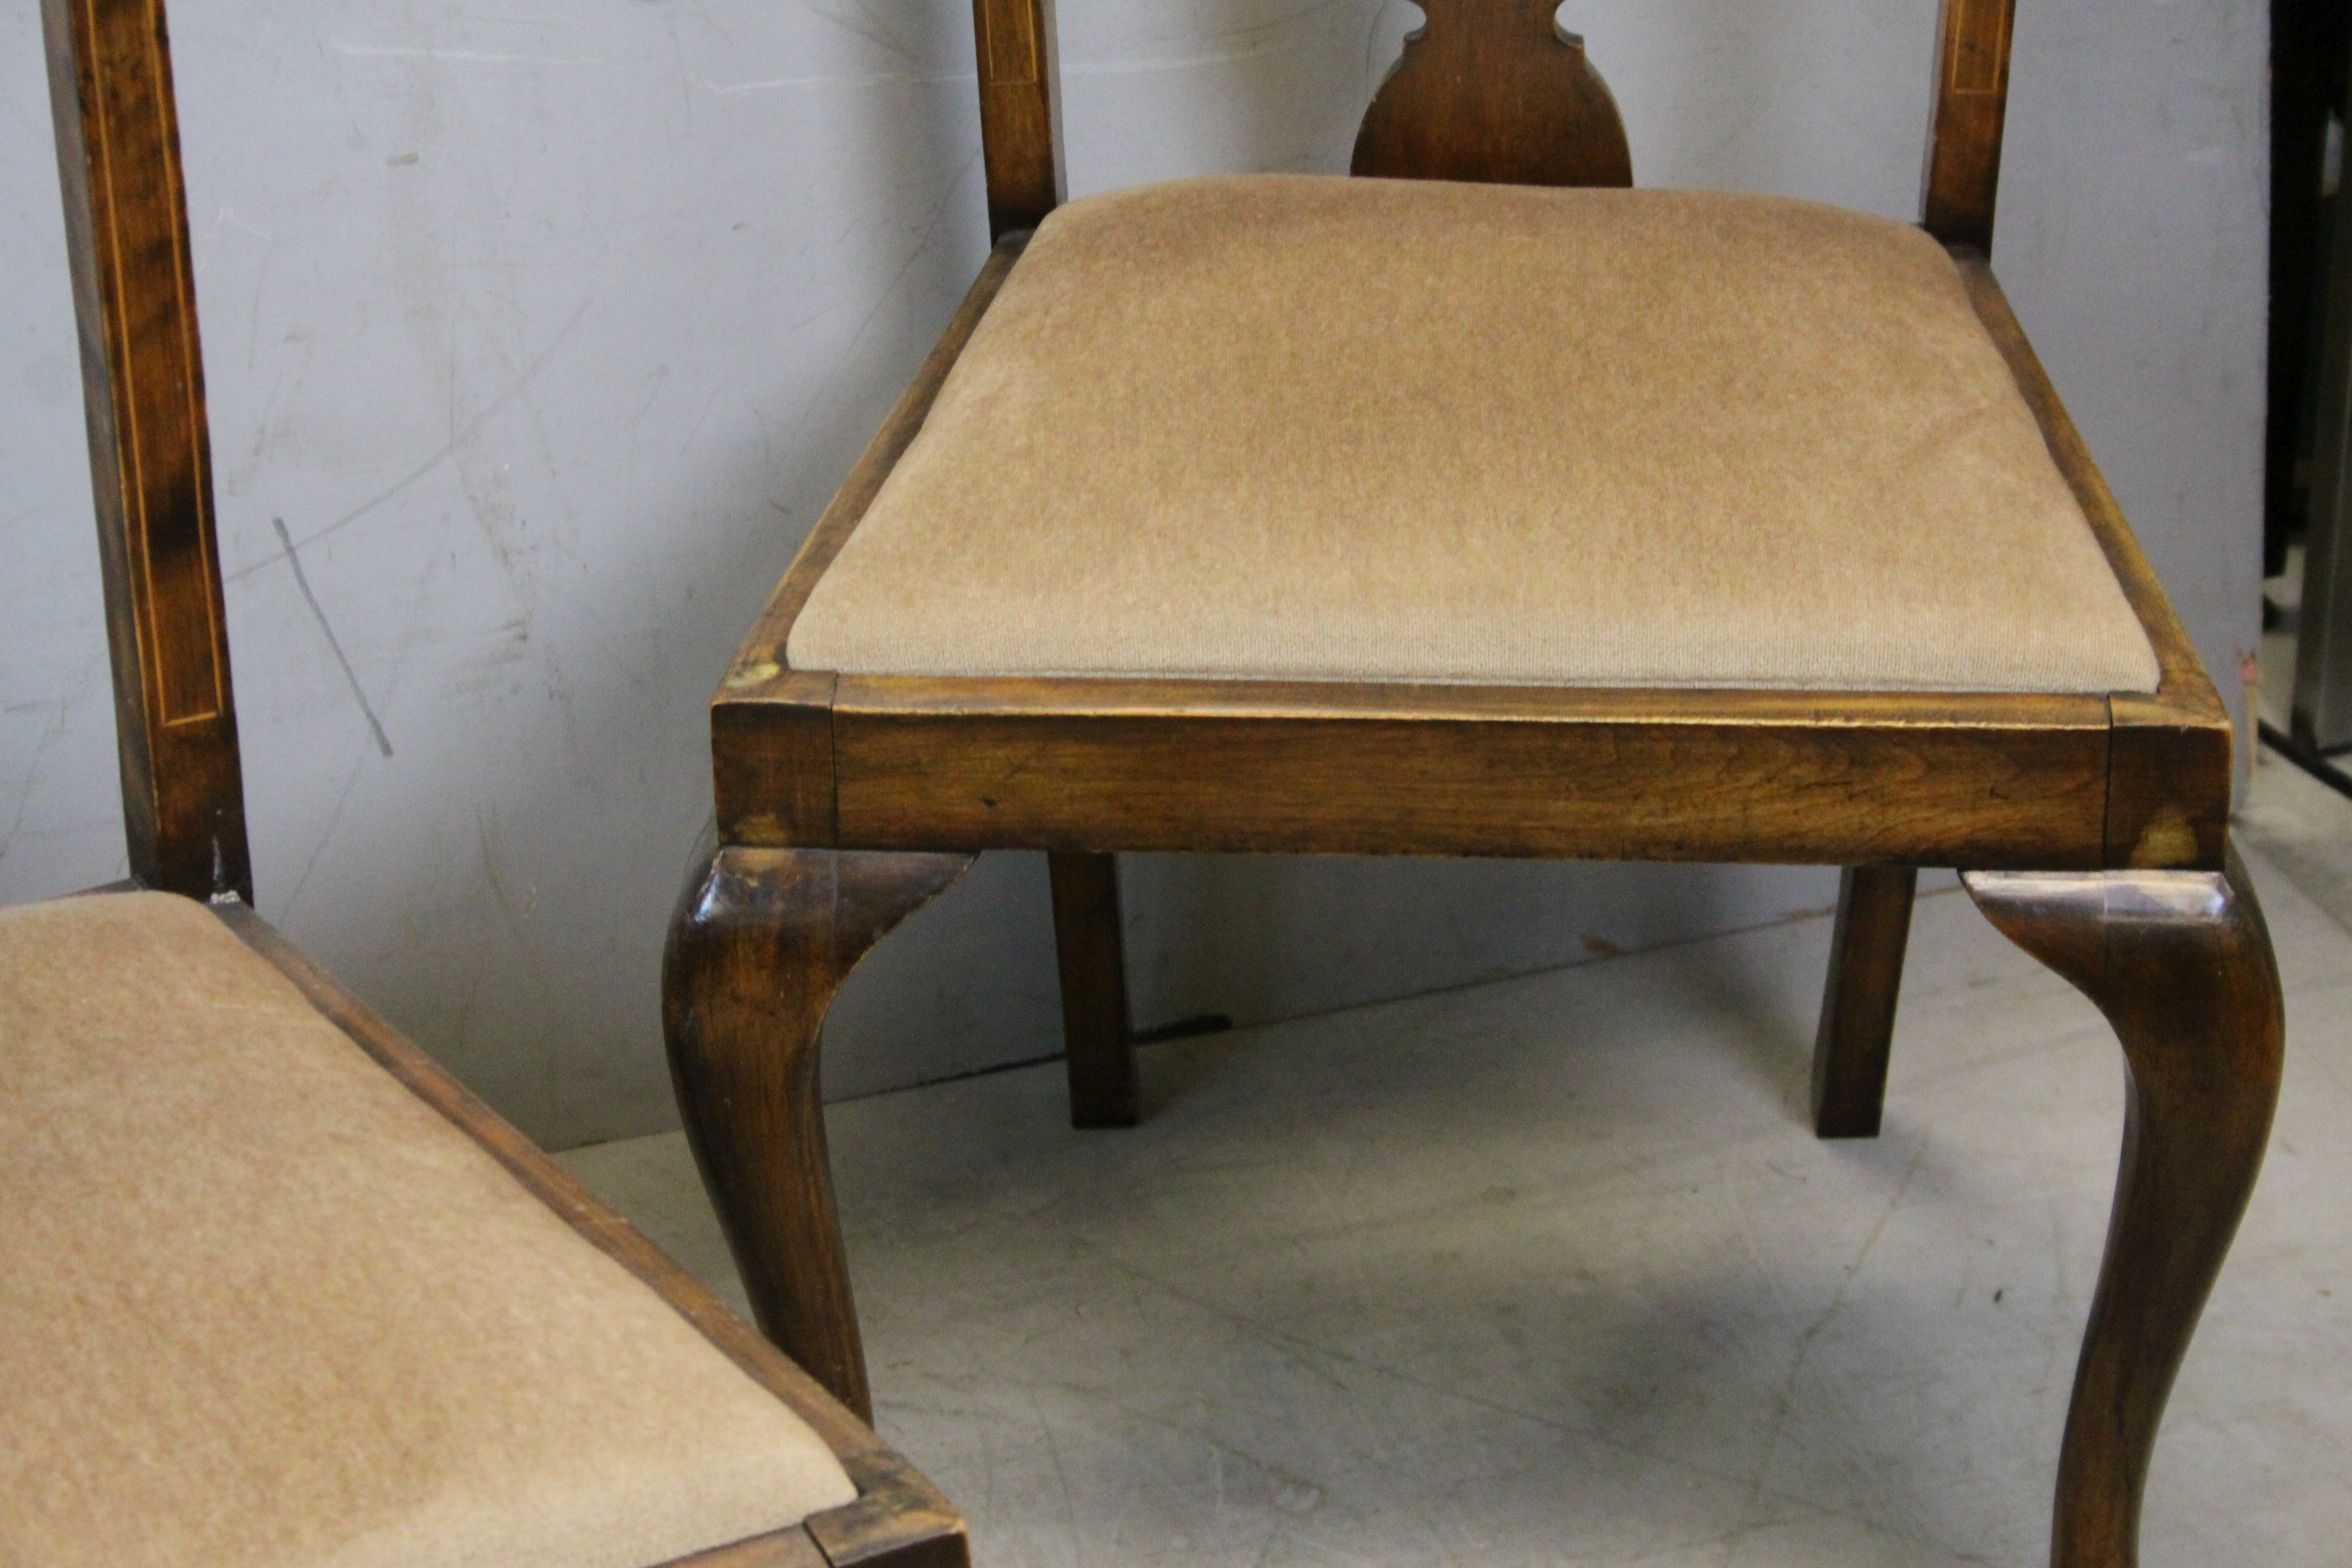 Set of Four Early 20th century Dining Chairs with Floral Inlaid and Pierced Splats, Drop in Seats - Image 5 of 5